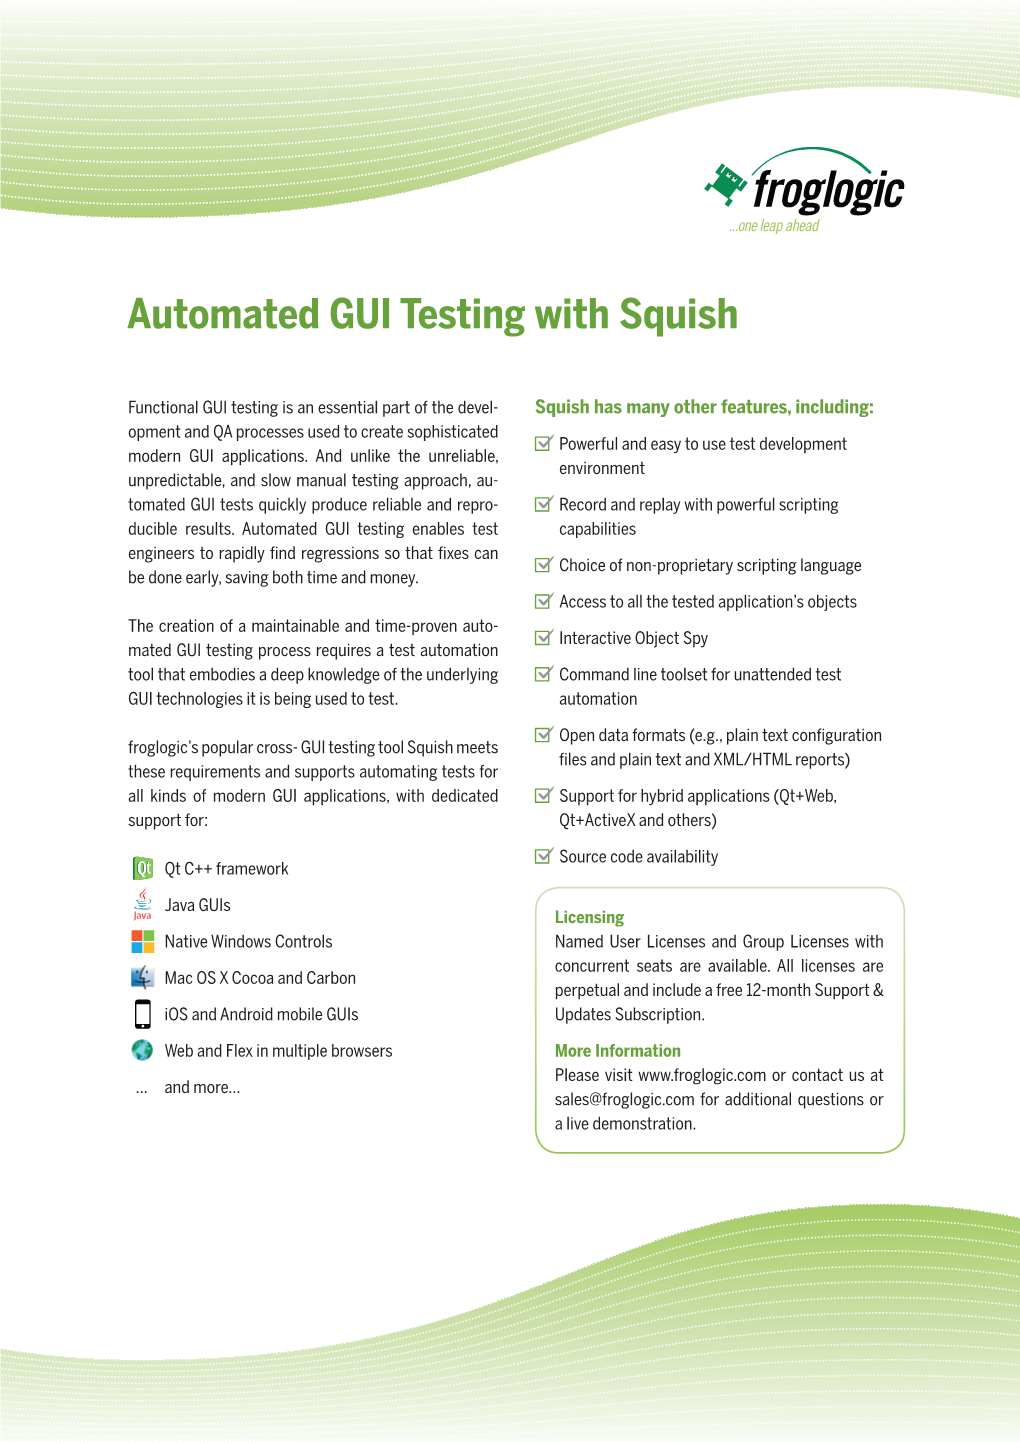 Automated GUI Testing with Squish